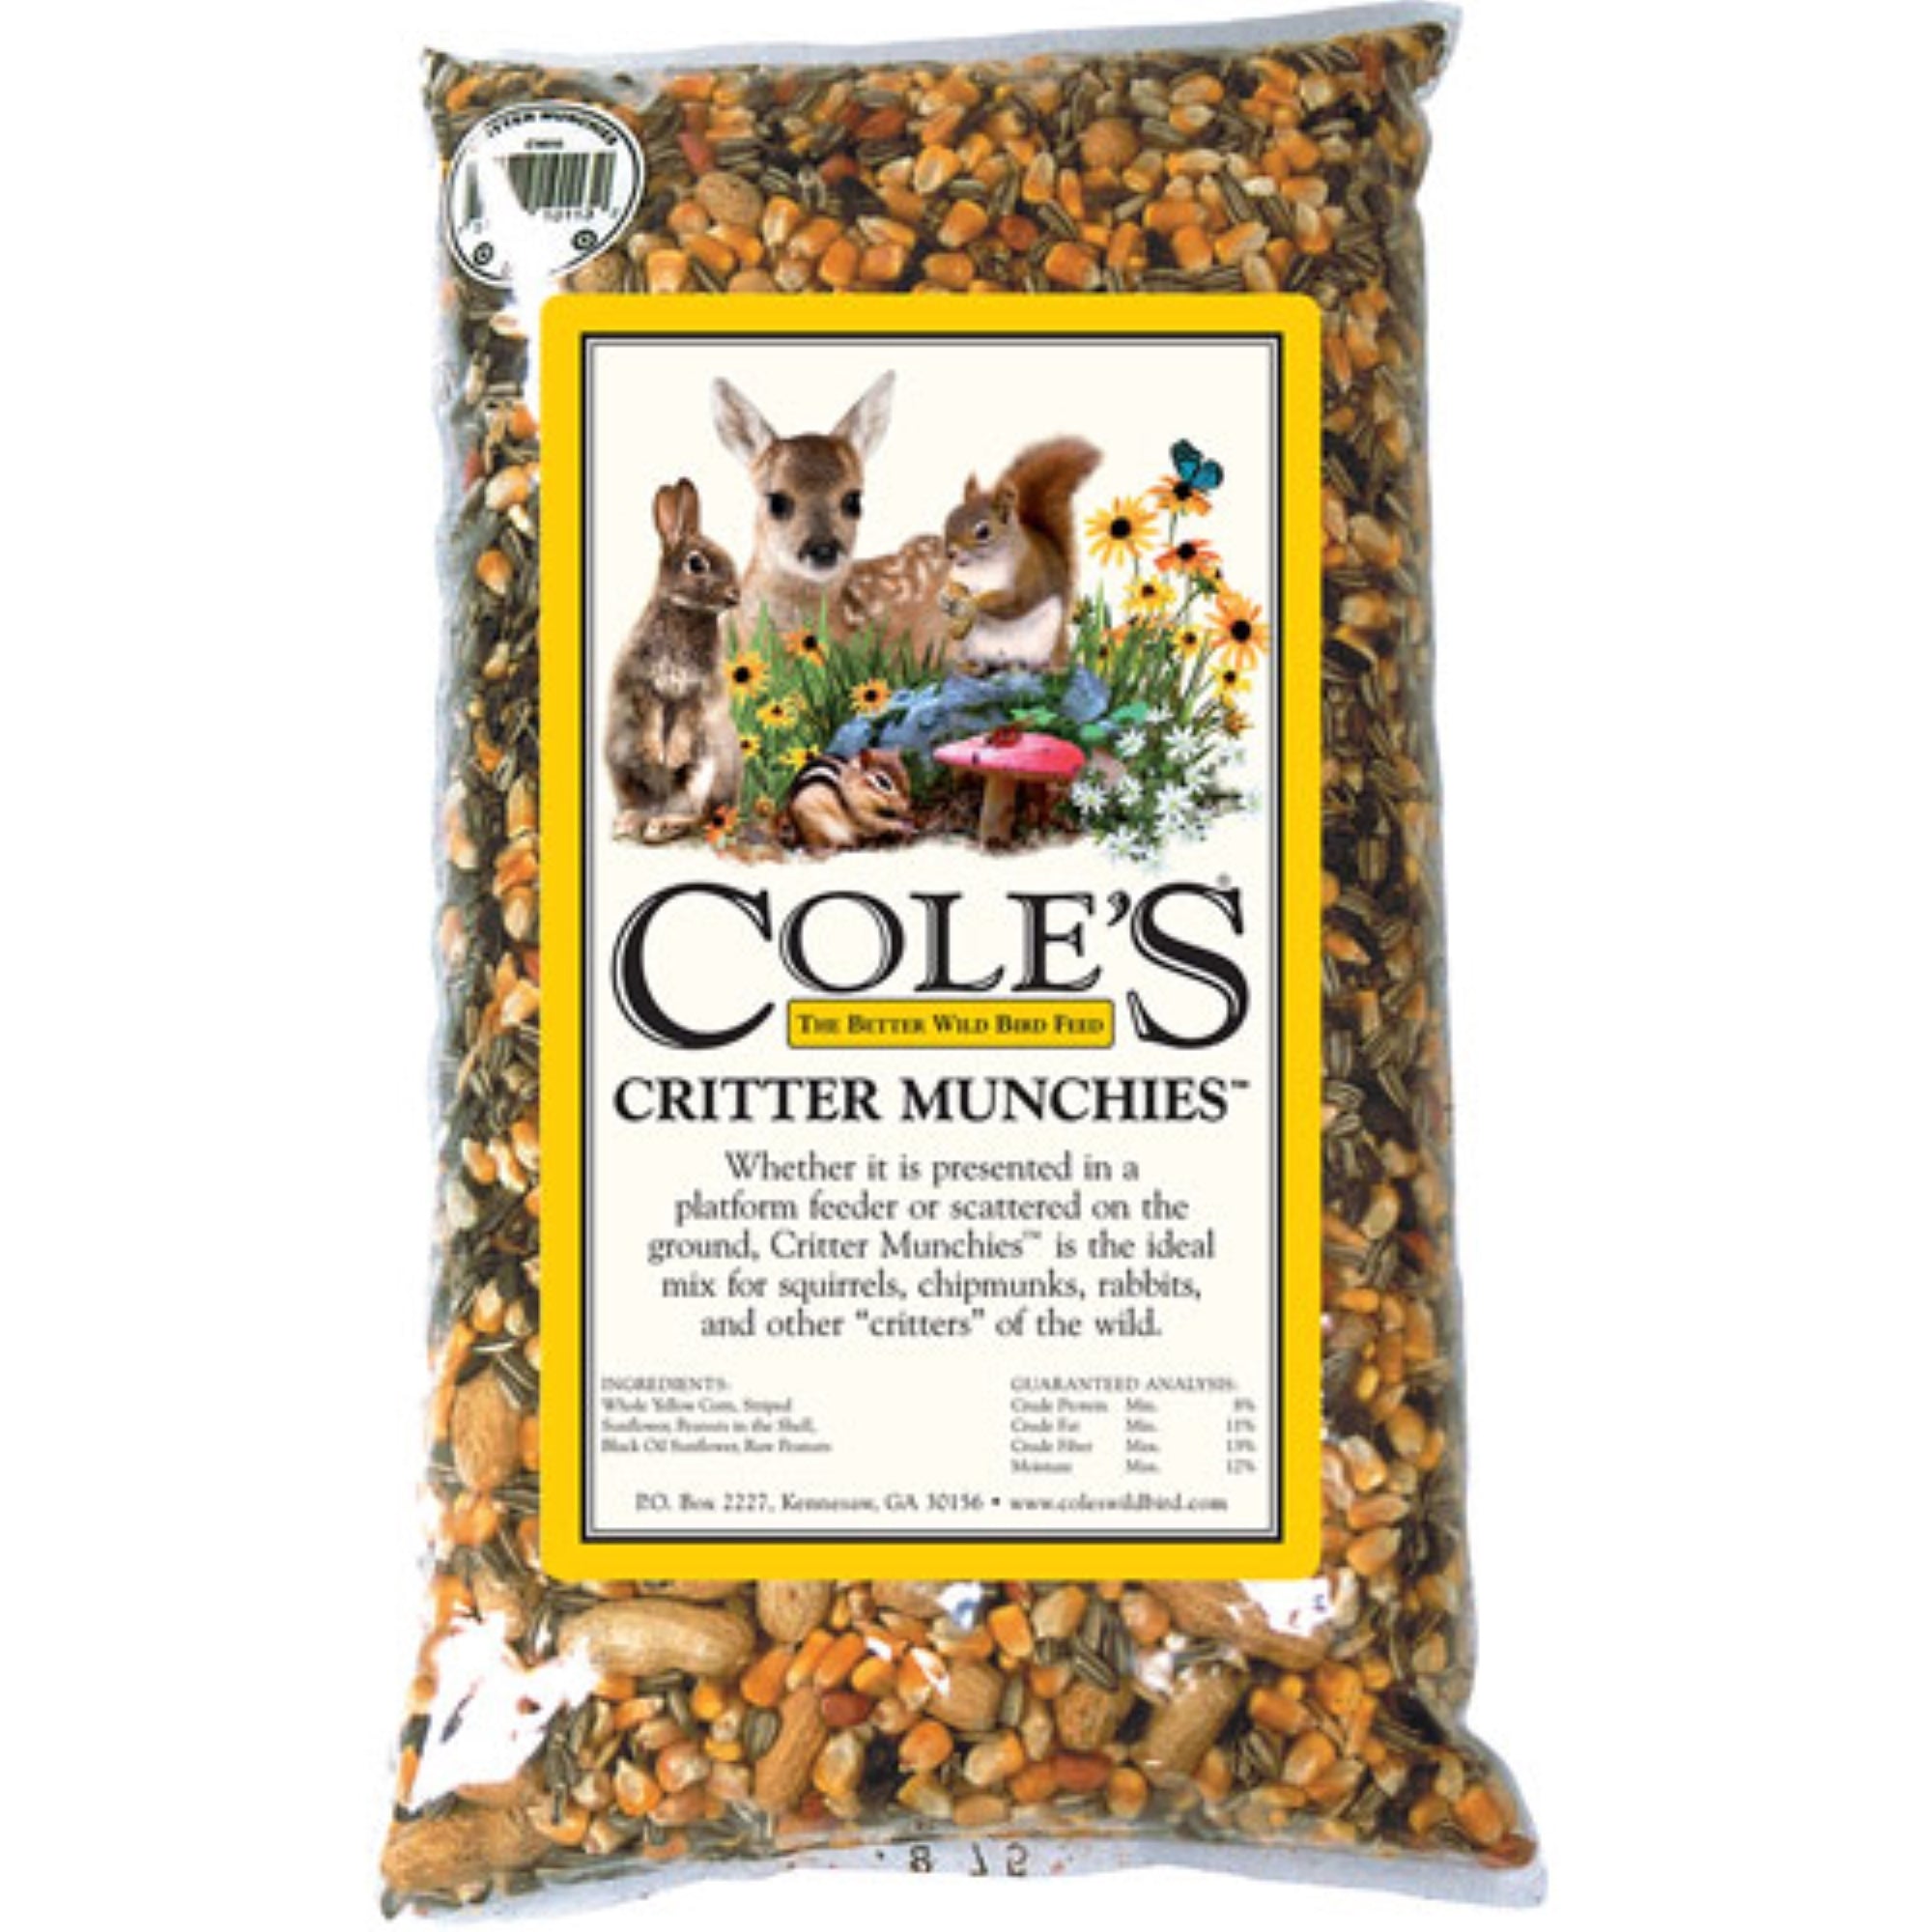 Cole’s Wild Bird Products Critter Munchies